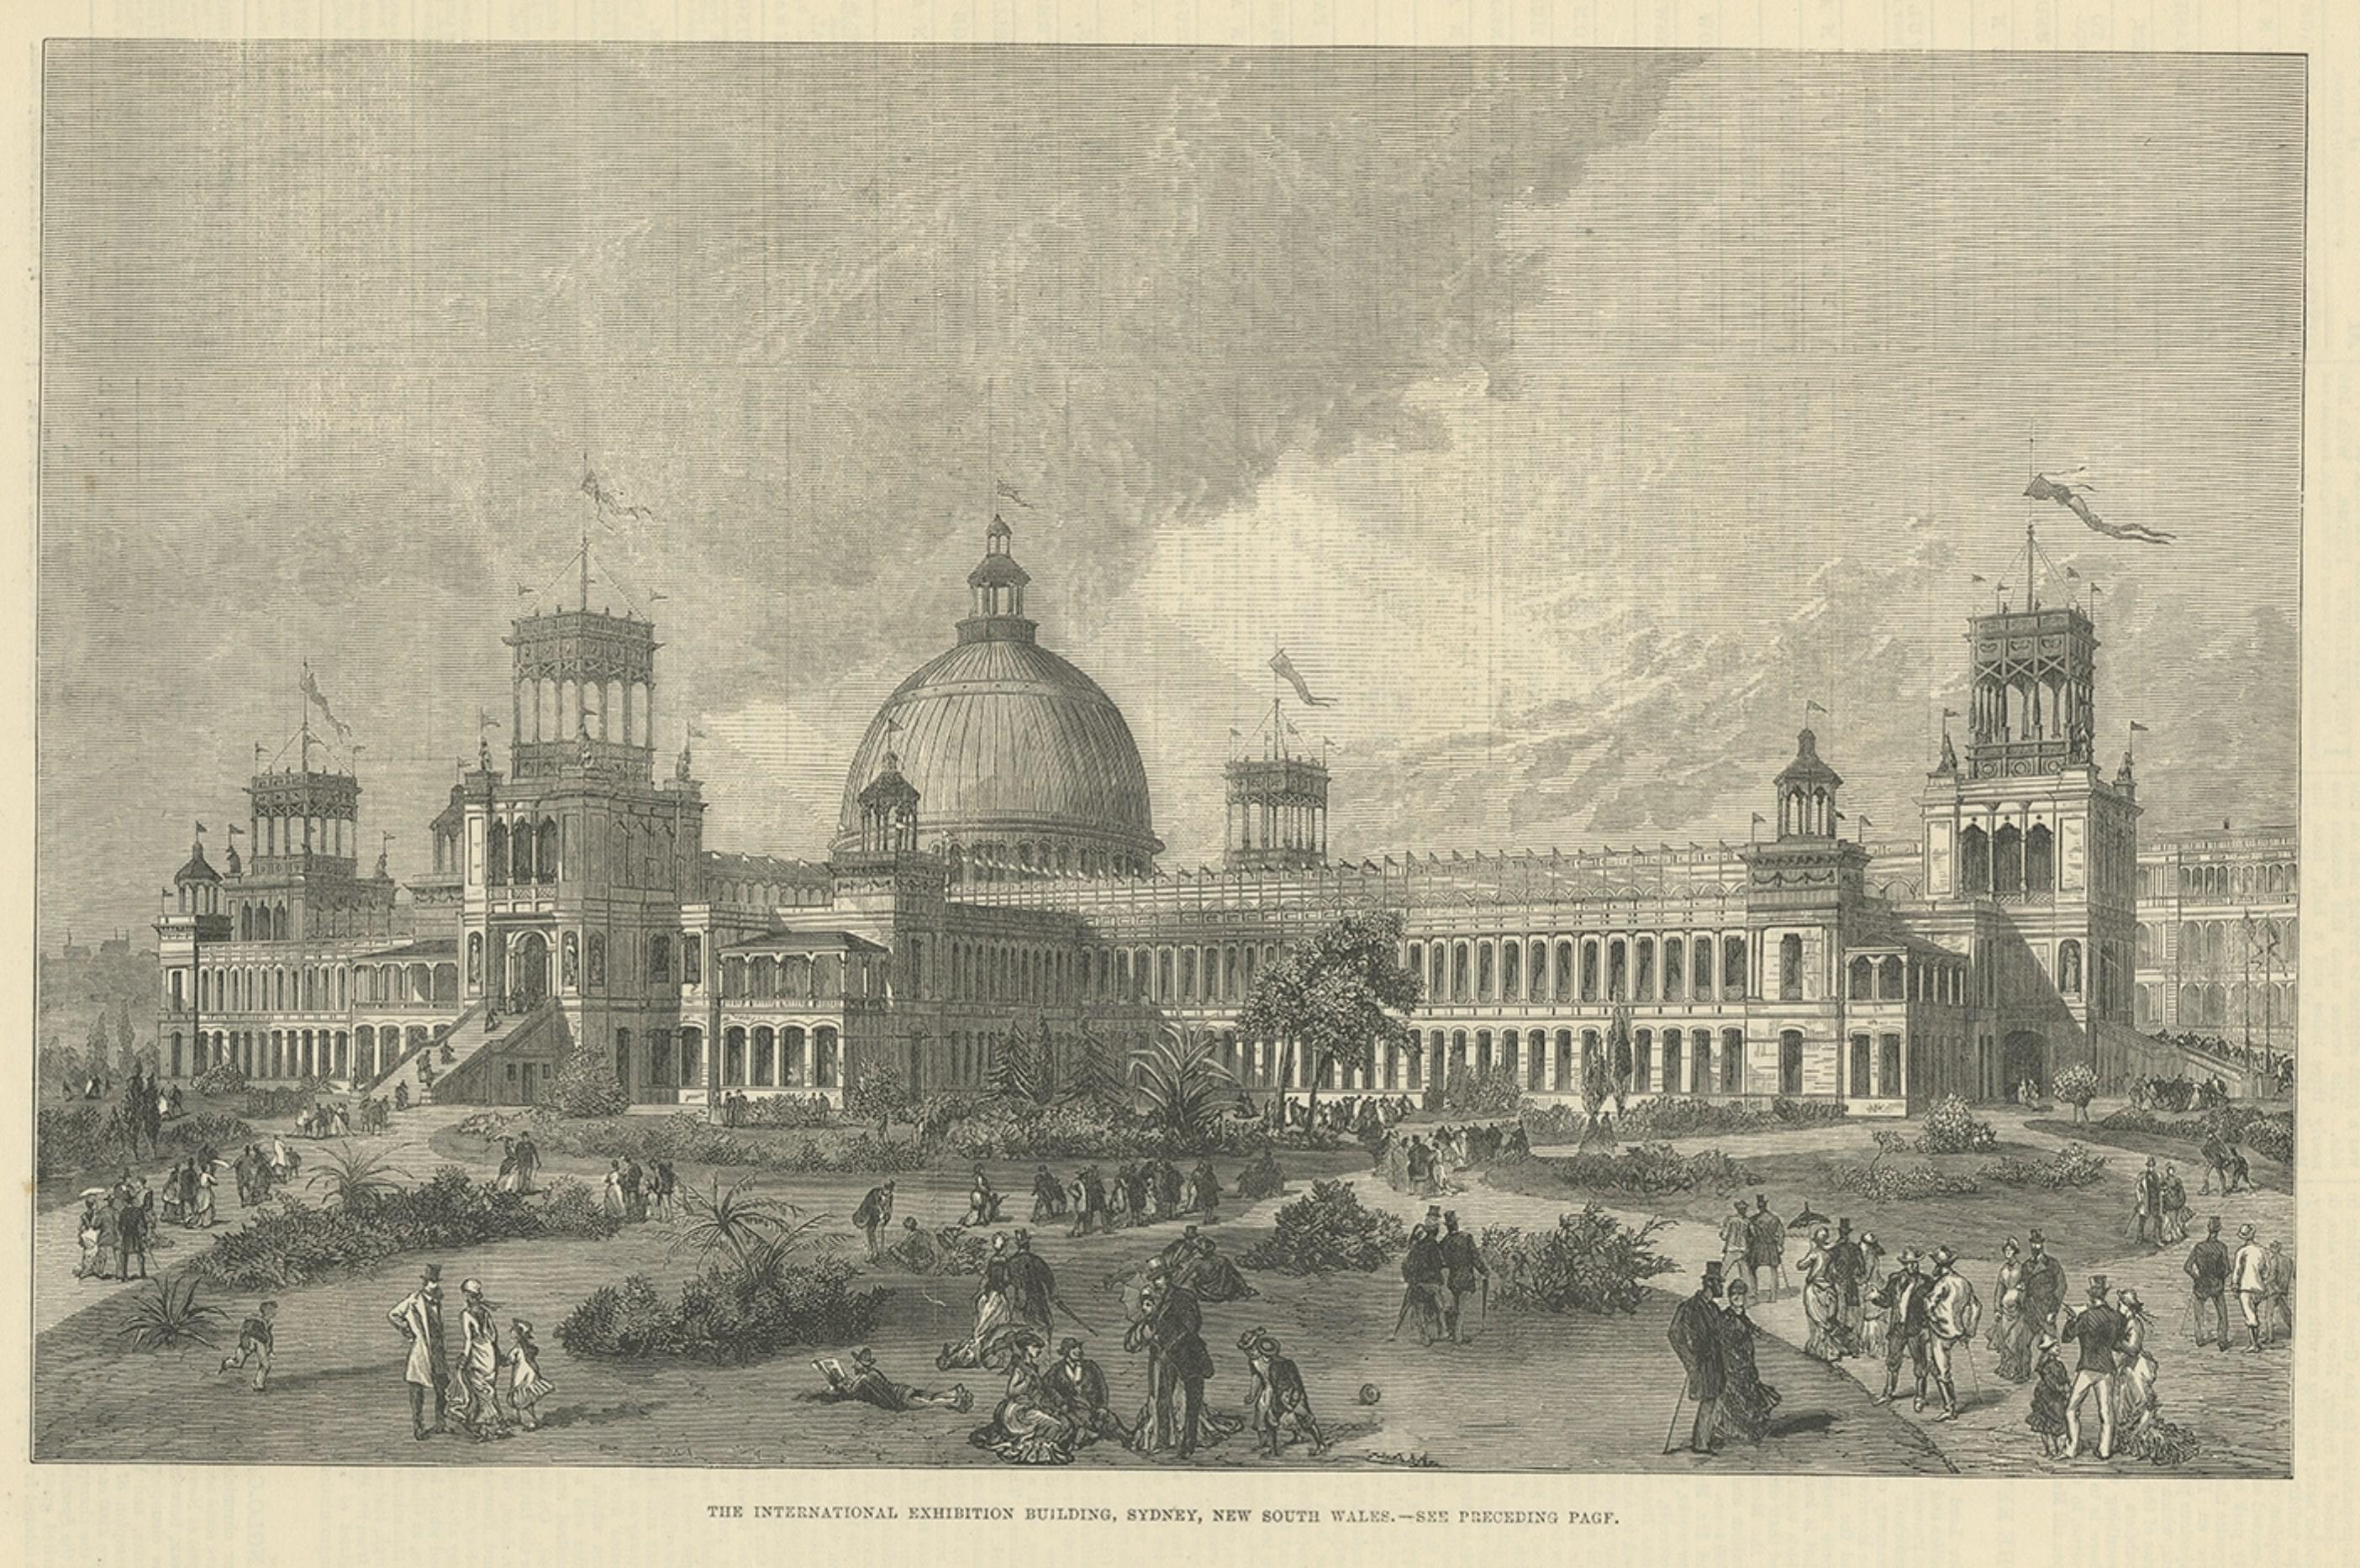 Antique print titled 'The International Exhibition Building'. 
The Sydney International Exhibition opened in the autumn of 1879, but it wasn't really universal and therefore not officially recognised by the Bureau of International Expositions.